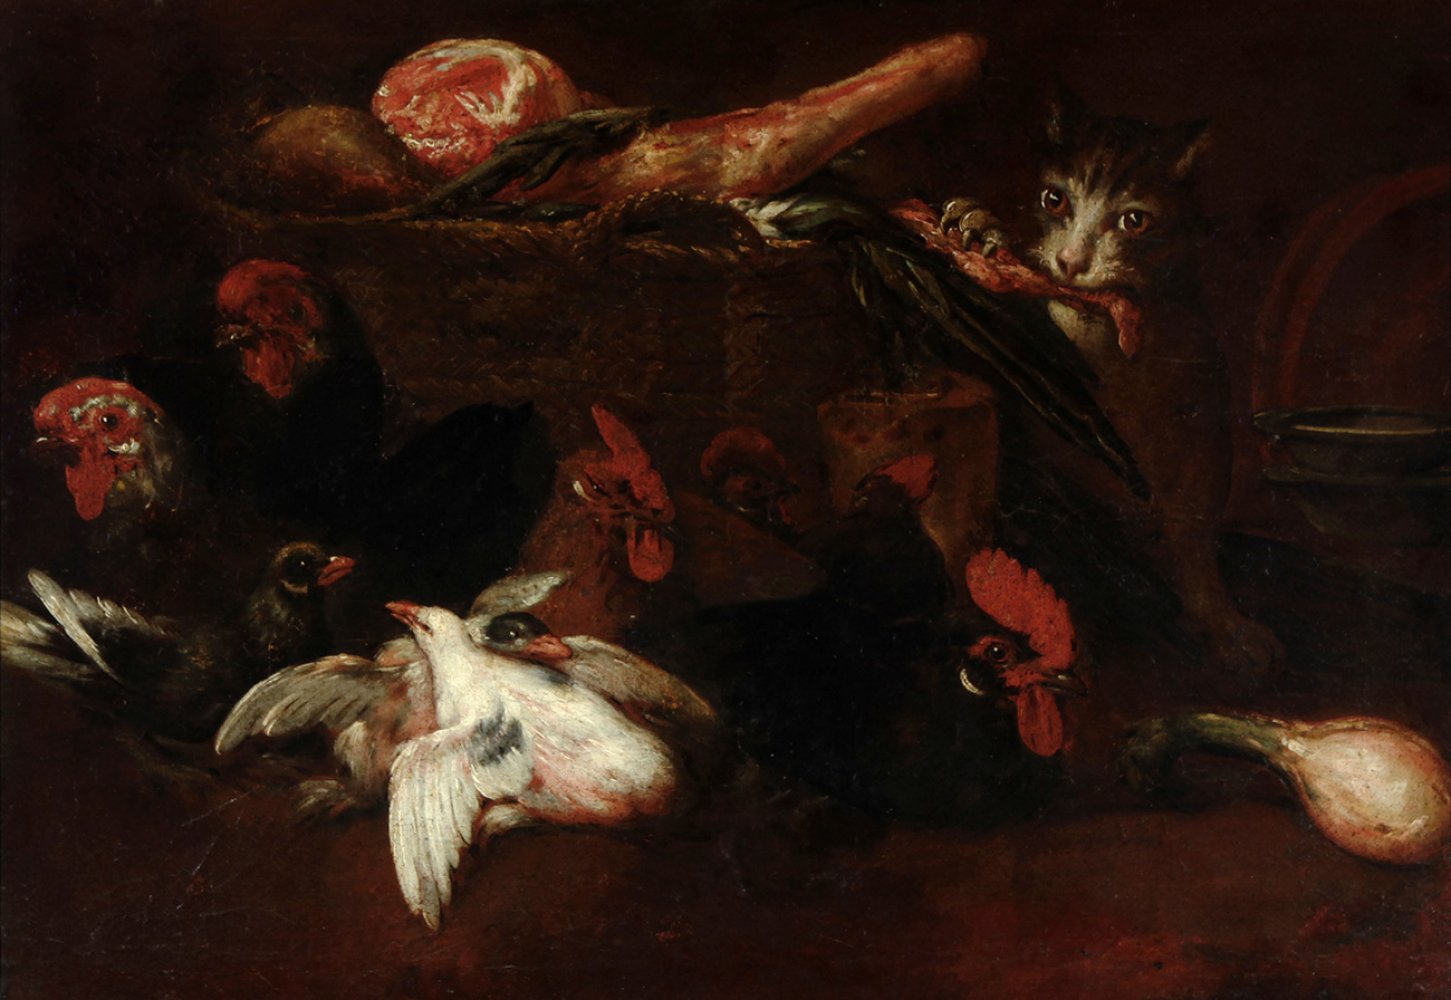 17th century Spanish school."Still life with cat and poultry".Oil on canvas.Measurements: 89 x 98